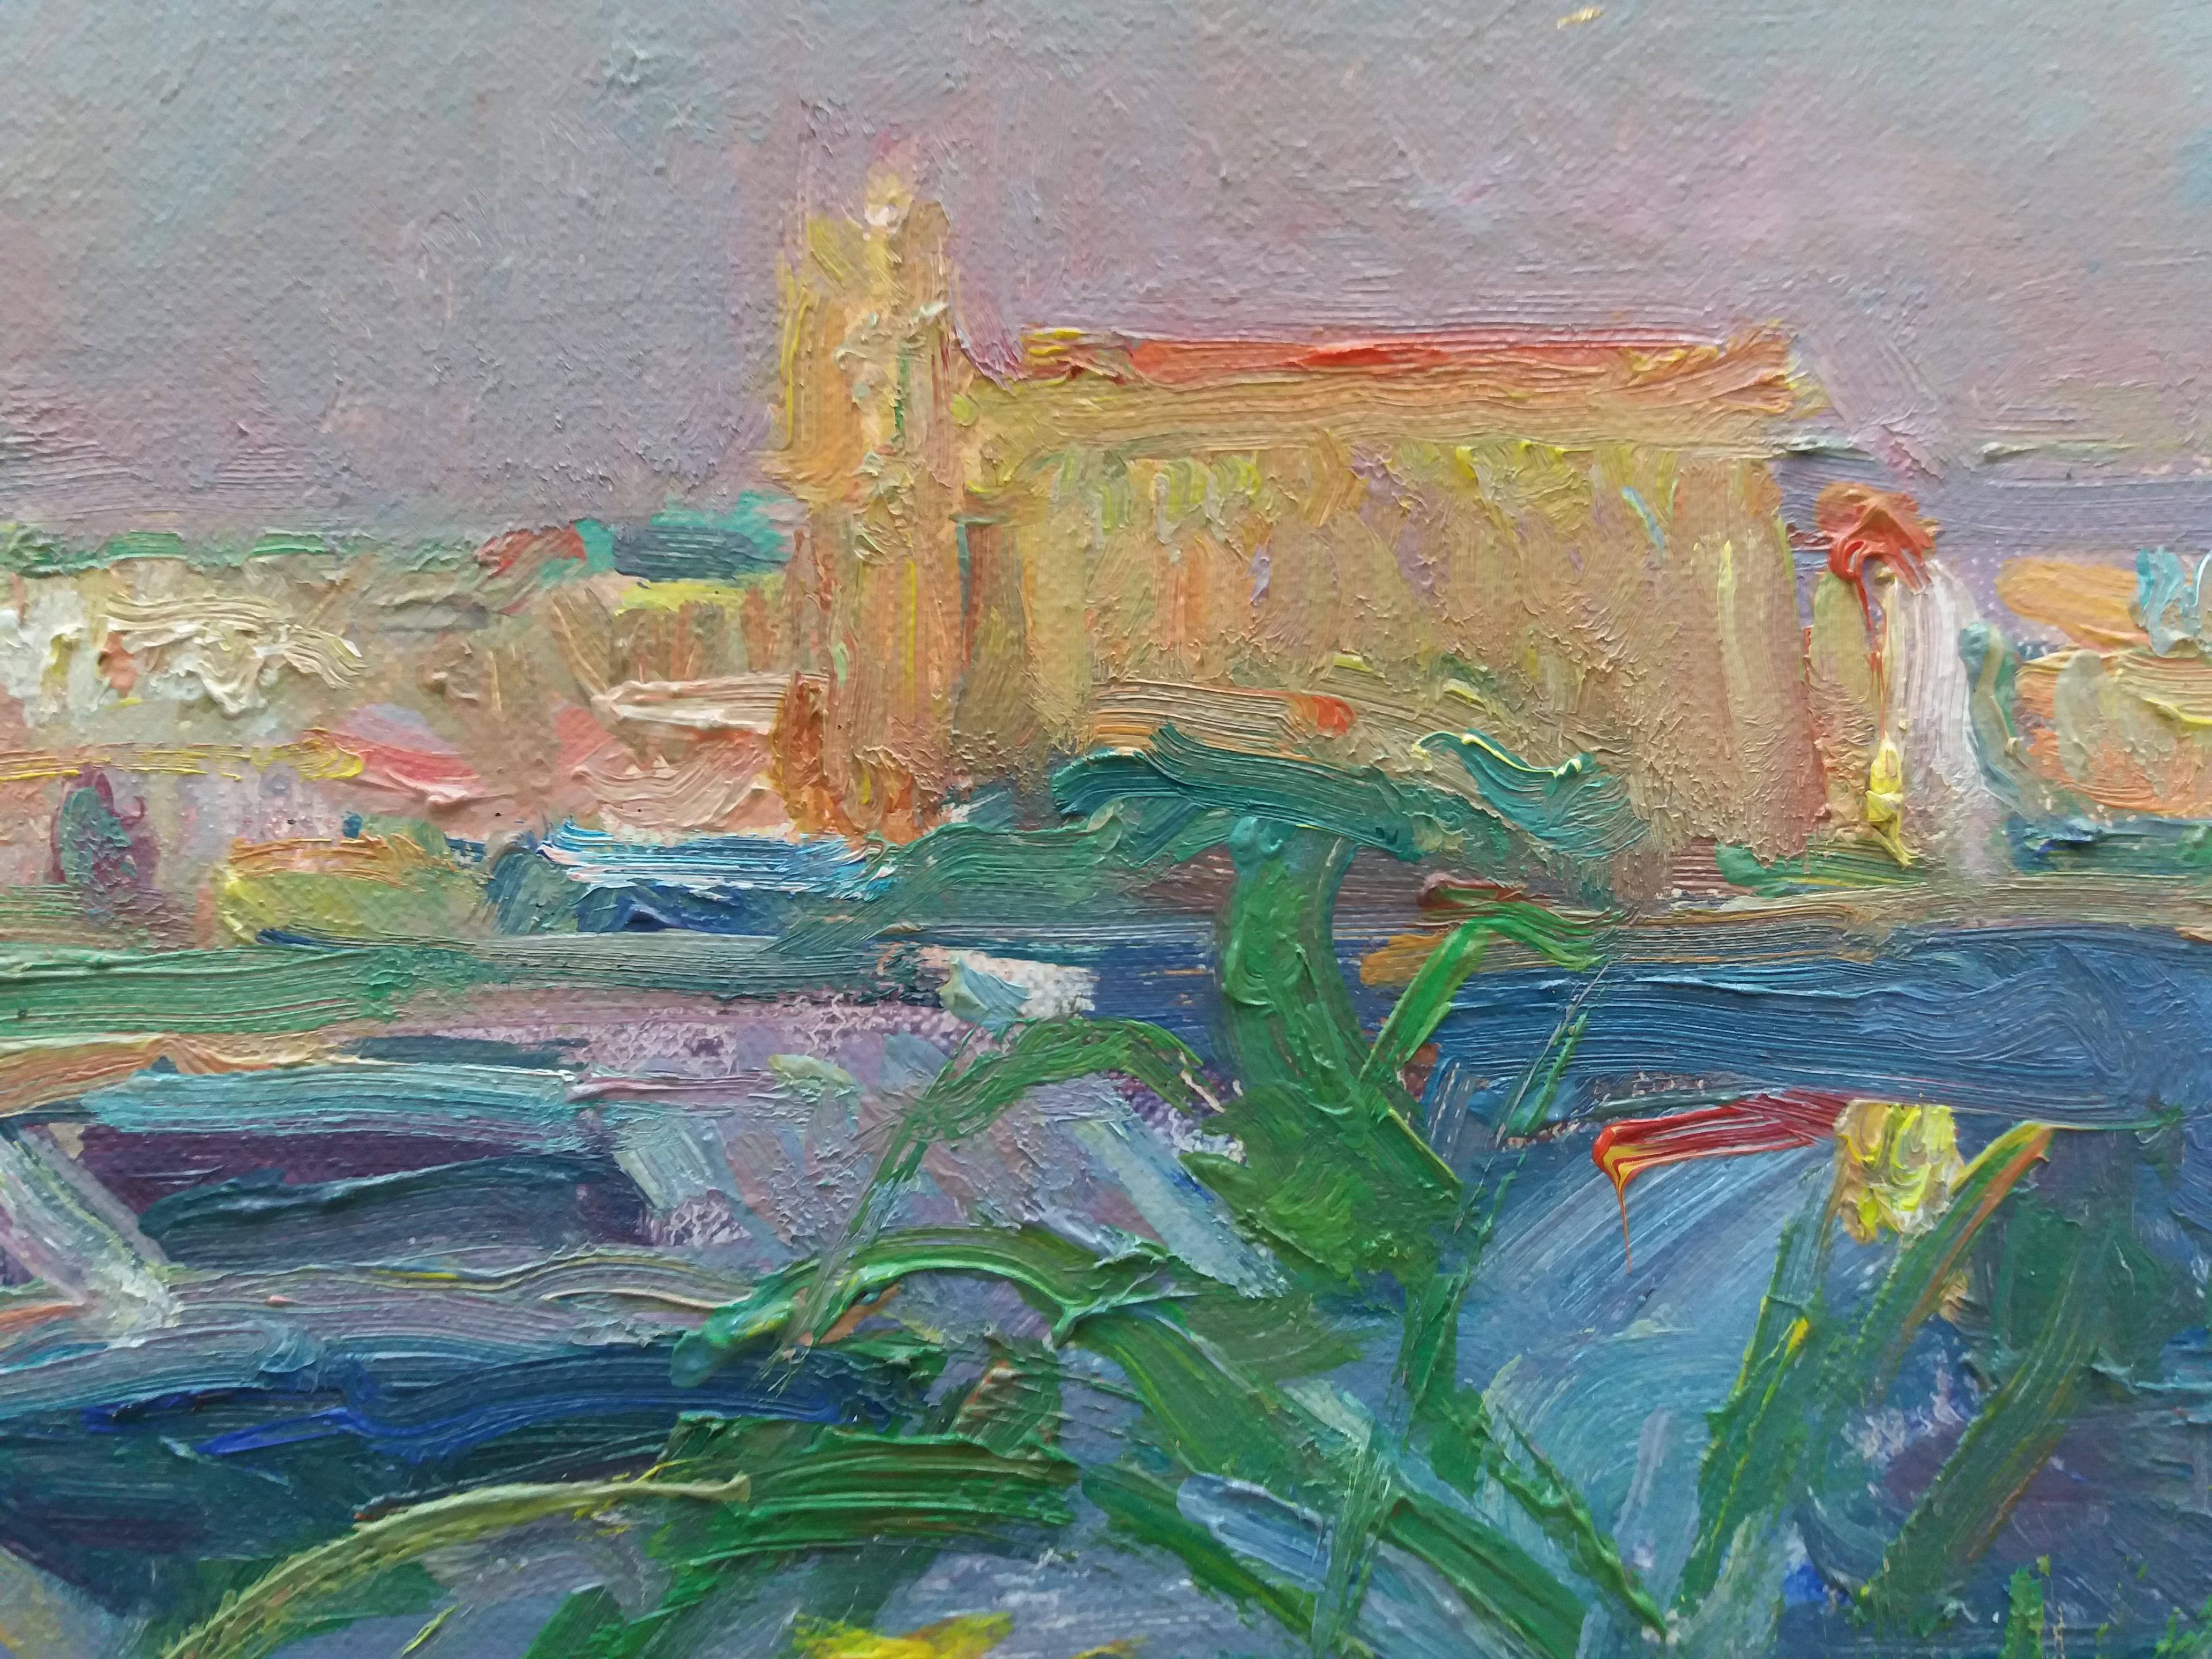 Palma Mallorca  Bay original impressionist acrylic painting.
SOLÁ PUIG paints in a natural way, which reflects the Old Masters, soaking up the colour, air, smell and the pure scent of his environment. He delivers to his canvas the strange mix of